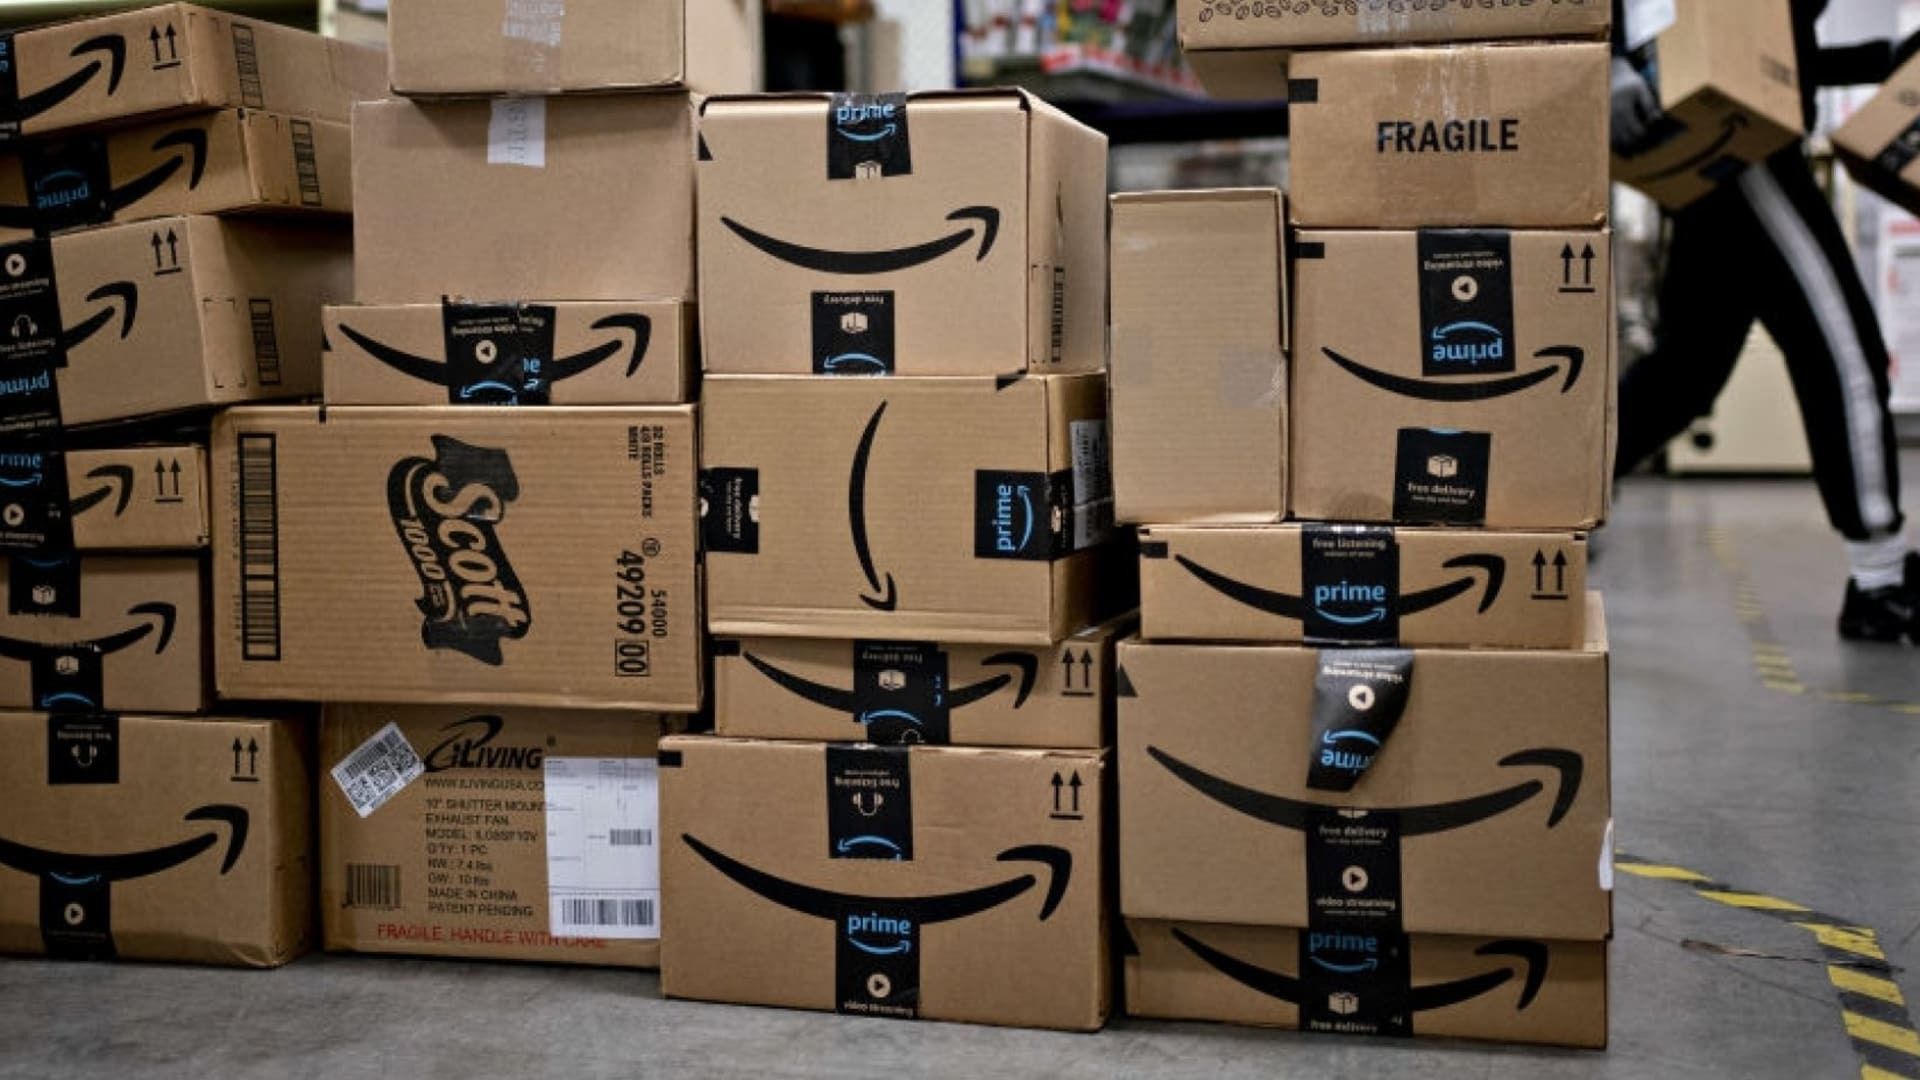 When is Amazon Prime Day date? Find best earyl deals (2022)! Let's learn who is the Amazon Prime Day commercial 2022 singer, compare Prime Day vs Black Friday.